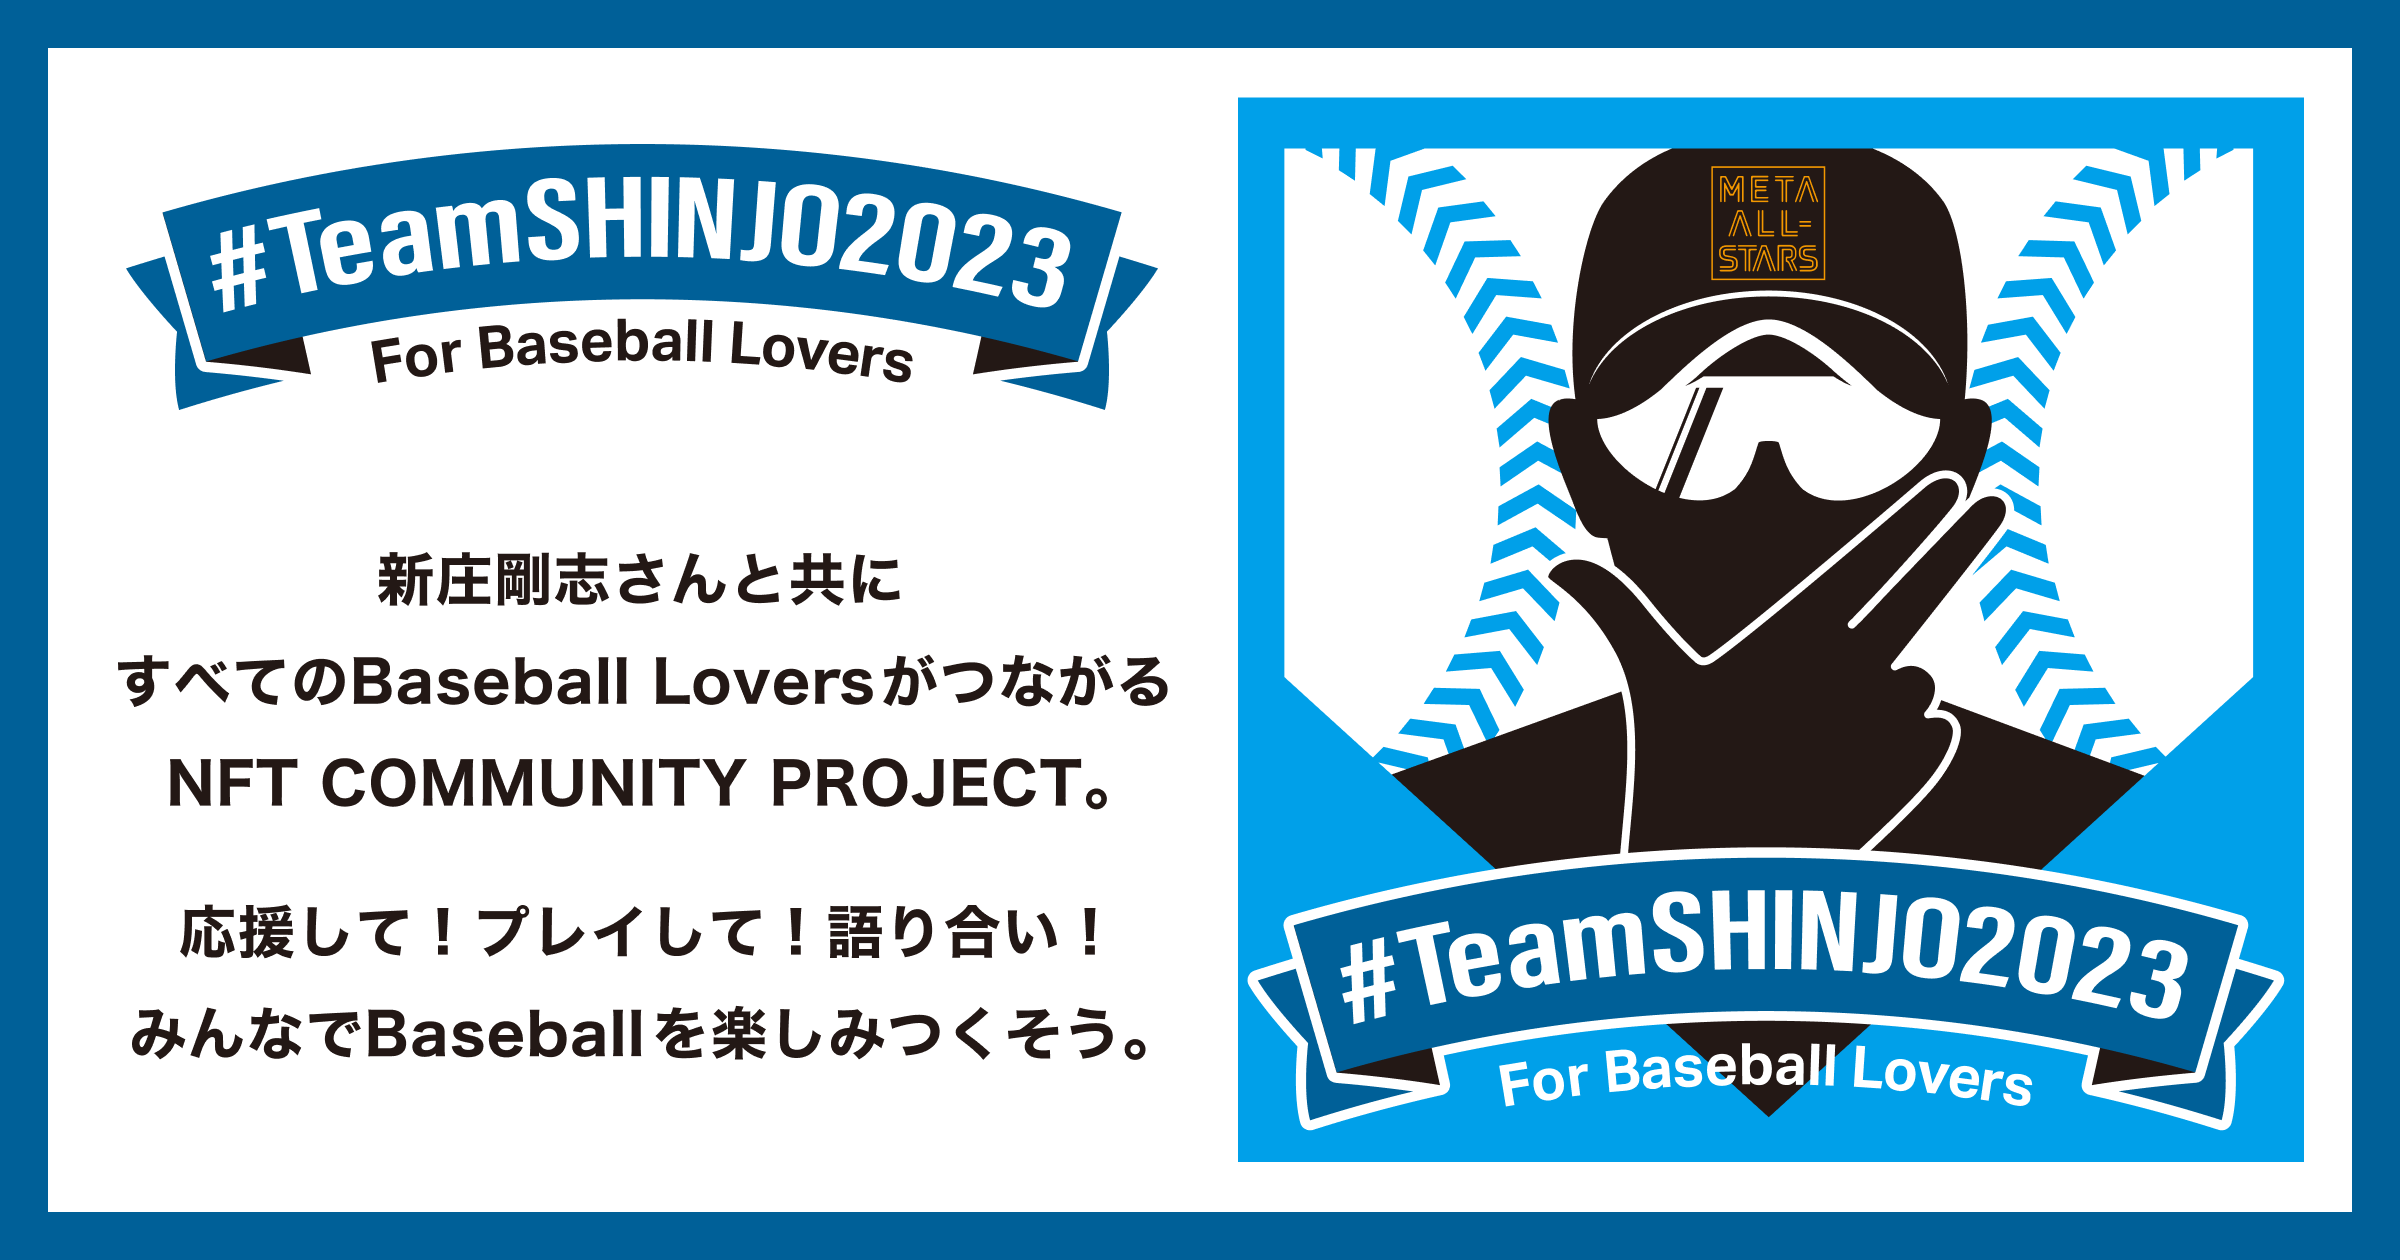 Announcement Regarding the Conclusion of '#TeamSHINJO2023 for Baseball Lovers'